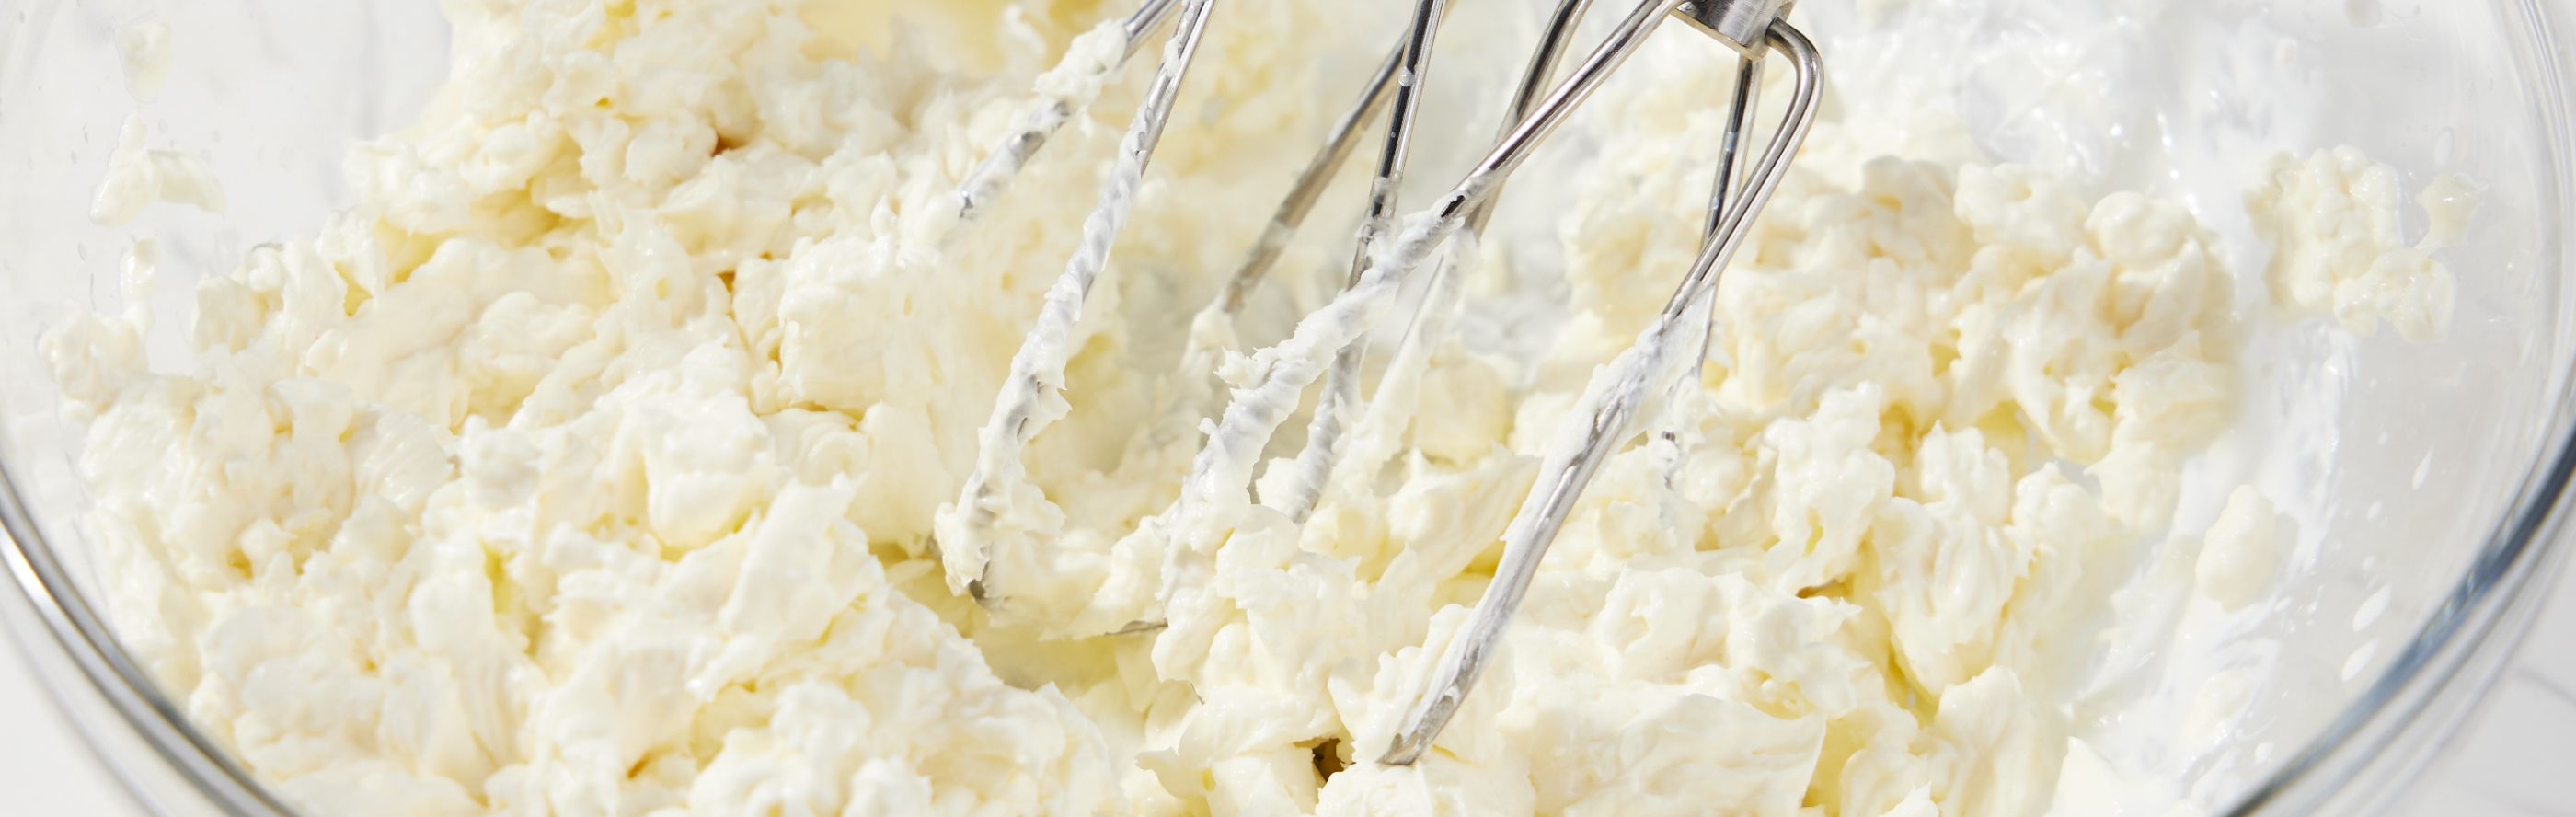 Hand mixer beaters in glass mixing bowl of creamed butter and sugar